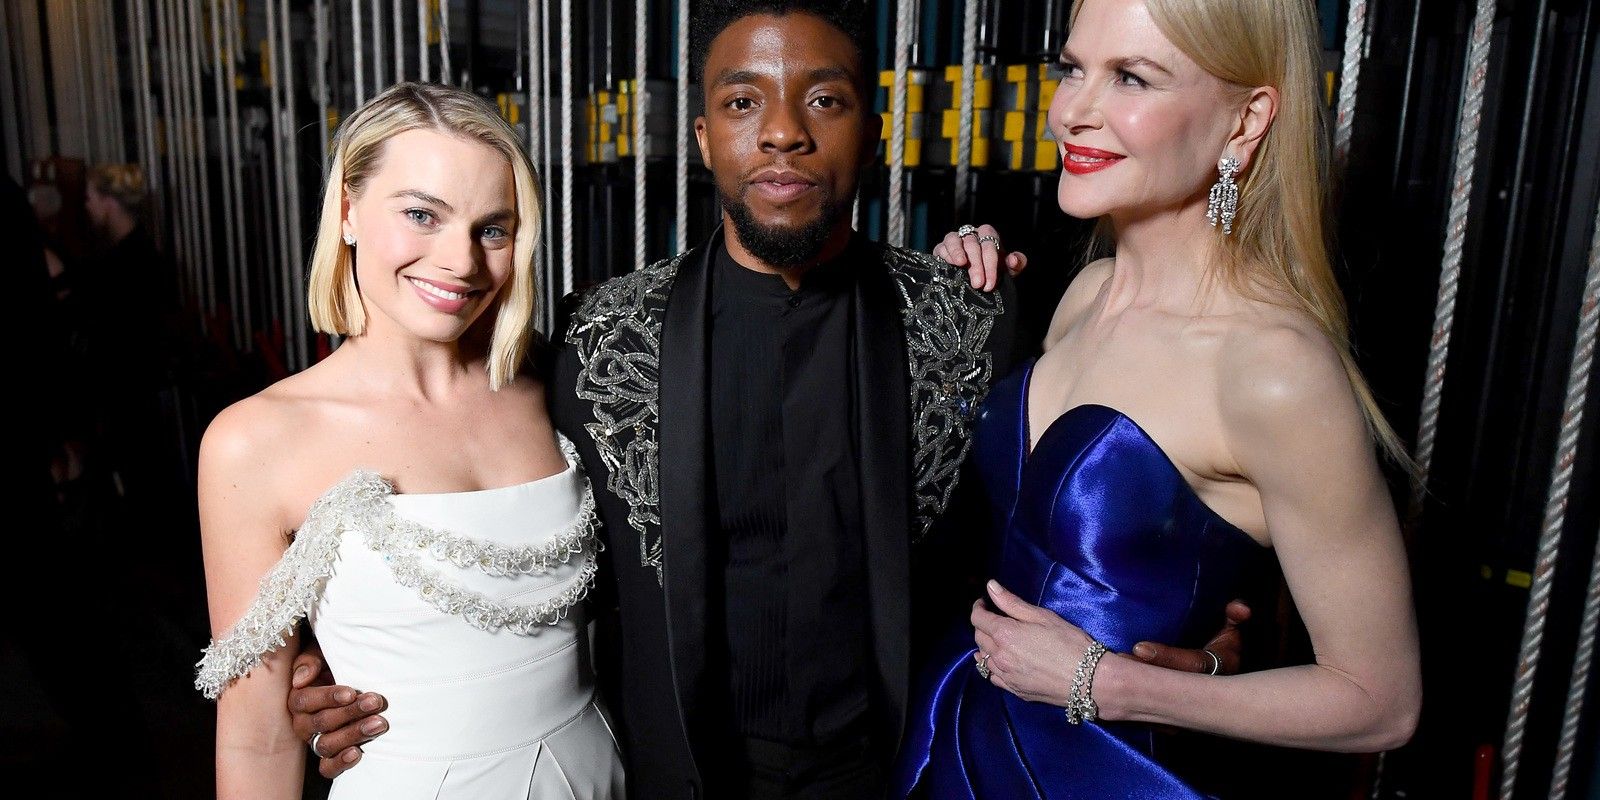 <p>Margot Robbie, Chadwick Boseman and Nicole Kidman attend&nbsp;the 90th Annual Academy Awards at the Dolby Theatre on March 4, 2018 in Hollywood, California. (Photo by Matt Petit/A.M.P.A.S via Getty Images)</p>